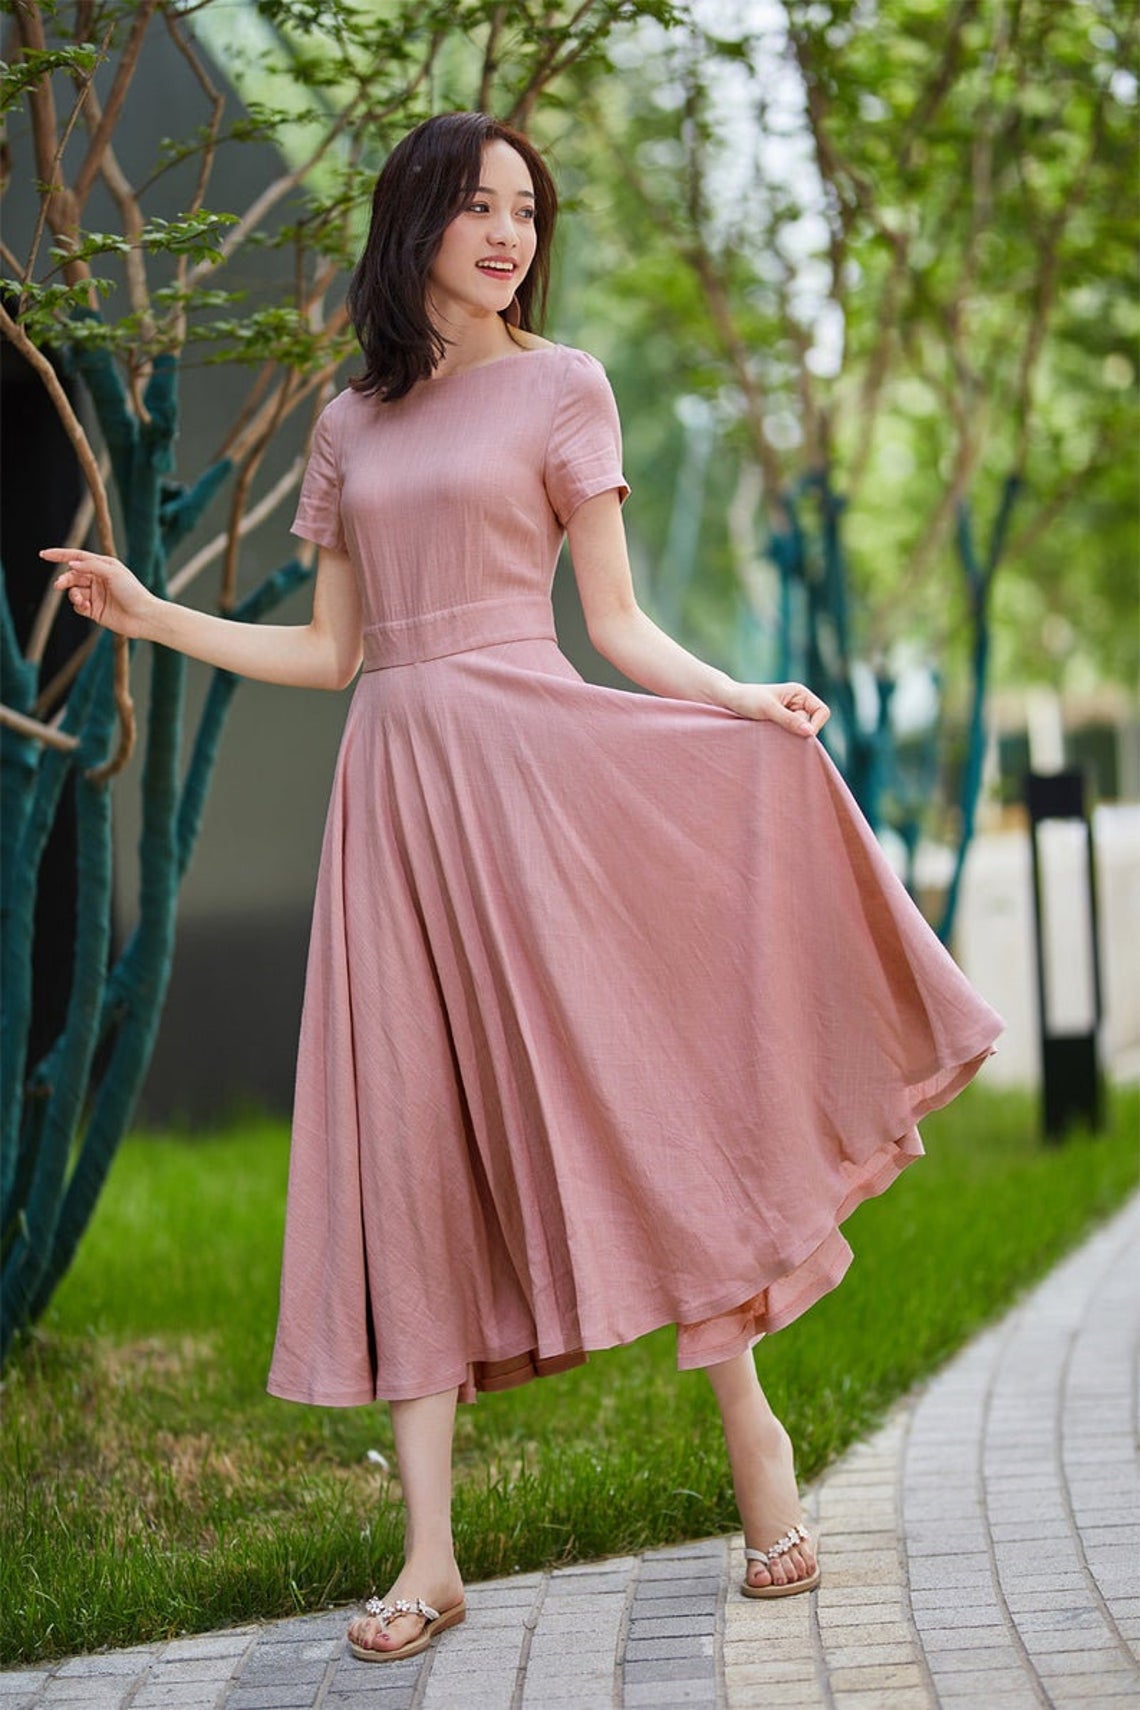 womens fit and flare dress